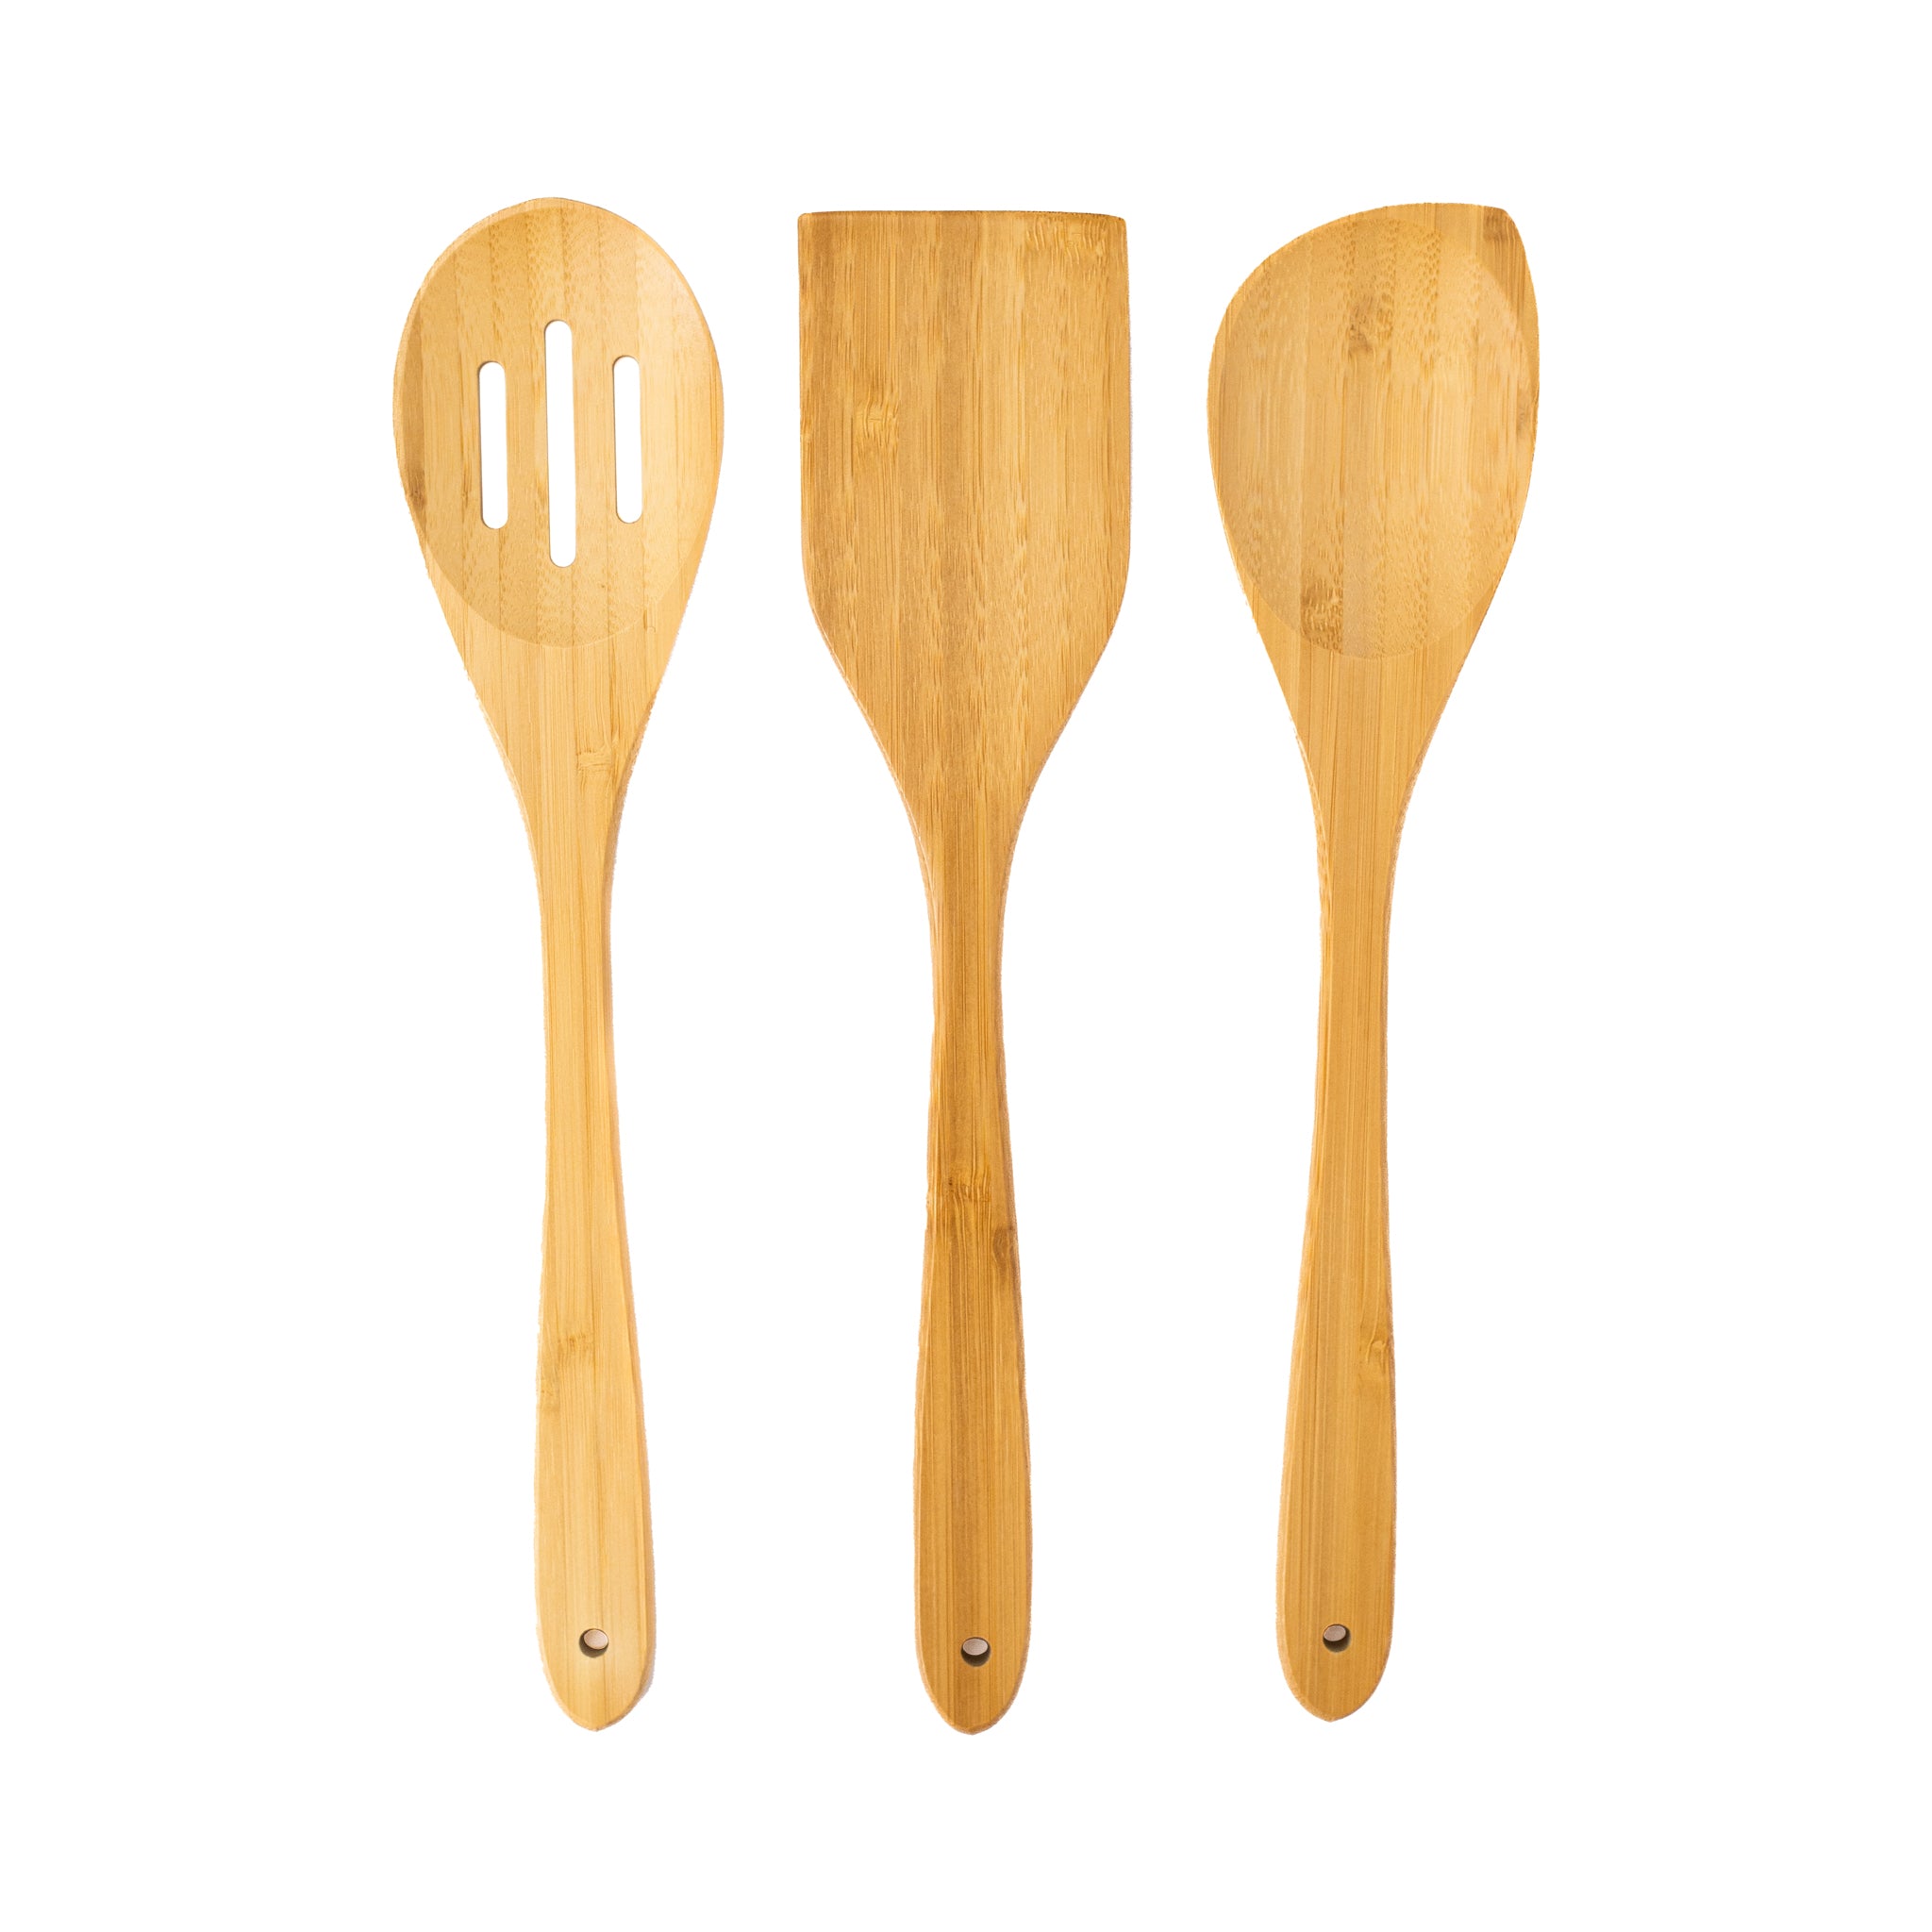 ADKINC Wooden Kitchen Utensil Set Uncoated Dishwasher Safe Bamboo Cooking Utensils Set with Holes, Organic Teak Wooden Spoons for Co